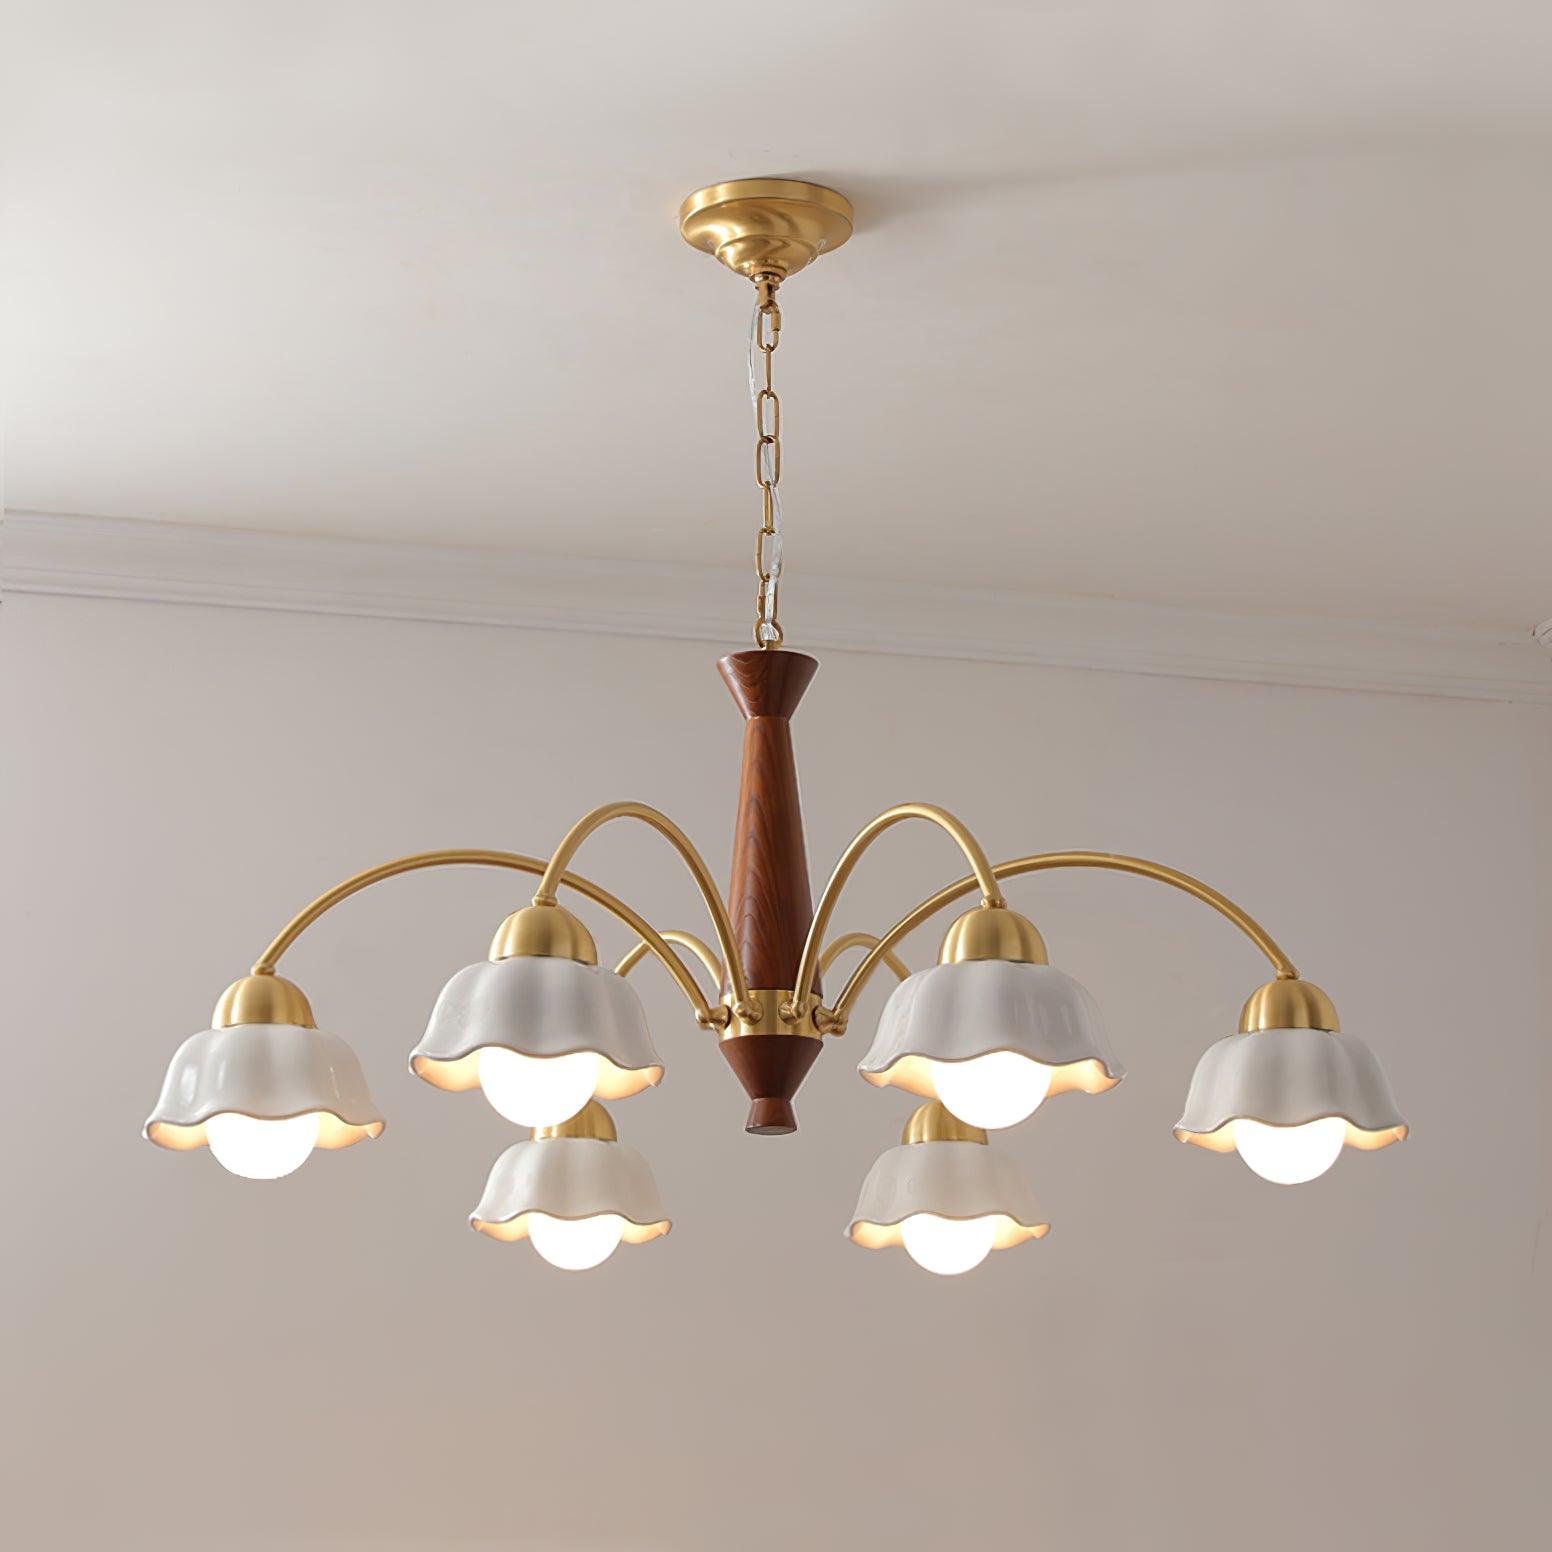 6-Head Swedish Modern Brass Chandelier: Diameter 29.5 inches x Height 16.9 inches (75cm x 43cm), Crafted with Brass and Walnut Wood